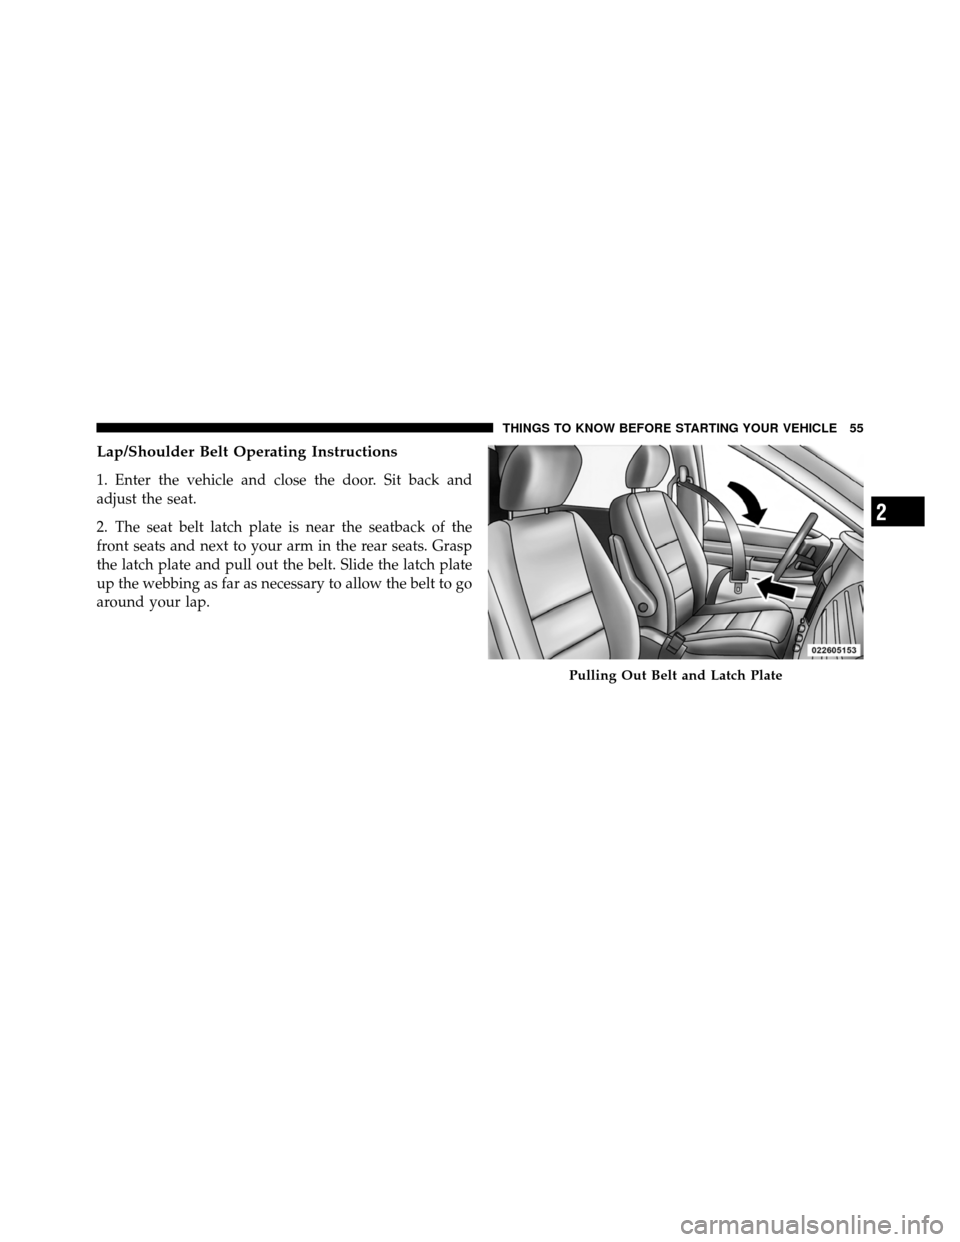 CHRYSLER TOWN AND COUNTRY 2010 5.G Owners Manual Lap/Shoulder Belt Operating Instructions
1. Enter the vehicle and close the door. Sit back and
adjust the seat.
2. The seat belt latch plate is near the seatback of the
front seats and next to your ar